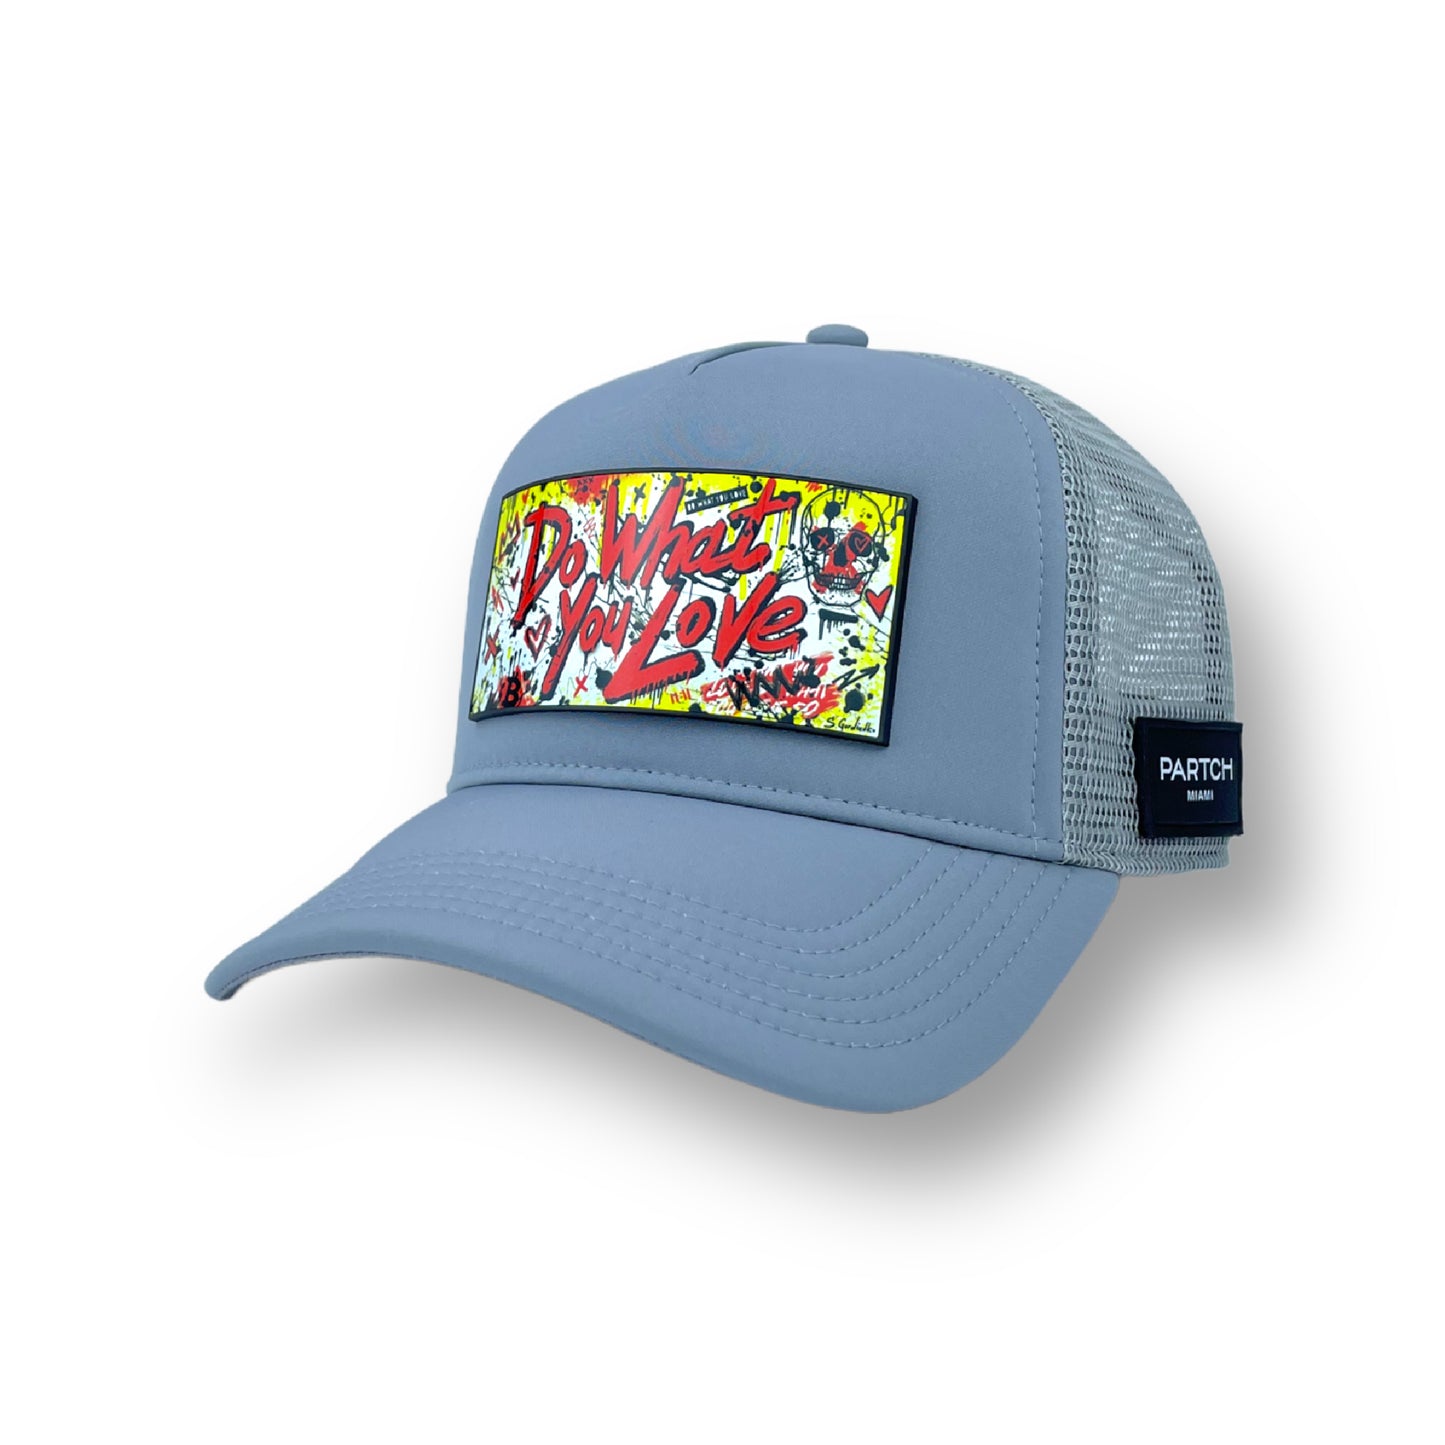 Partch Gray Fashion Trucker Hat Breathable with Do What You Love PARTCH-Clip interchangeable